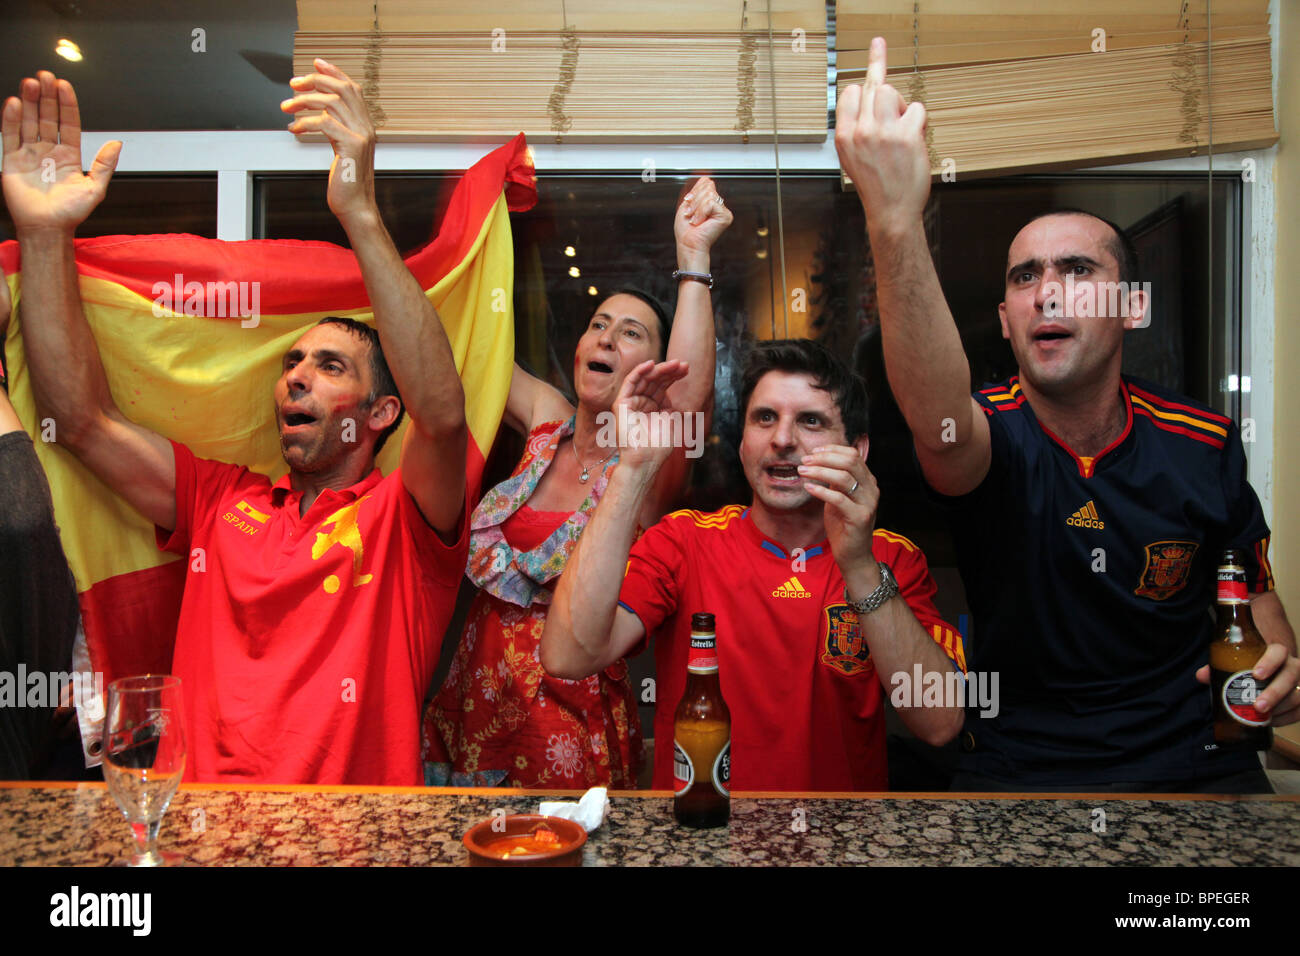 Supporters of Spain cheer and celebrate as their country wins the world cup final. Taken in a restaurant/bar in London Stock Photo